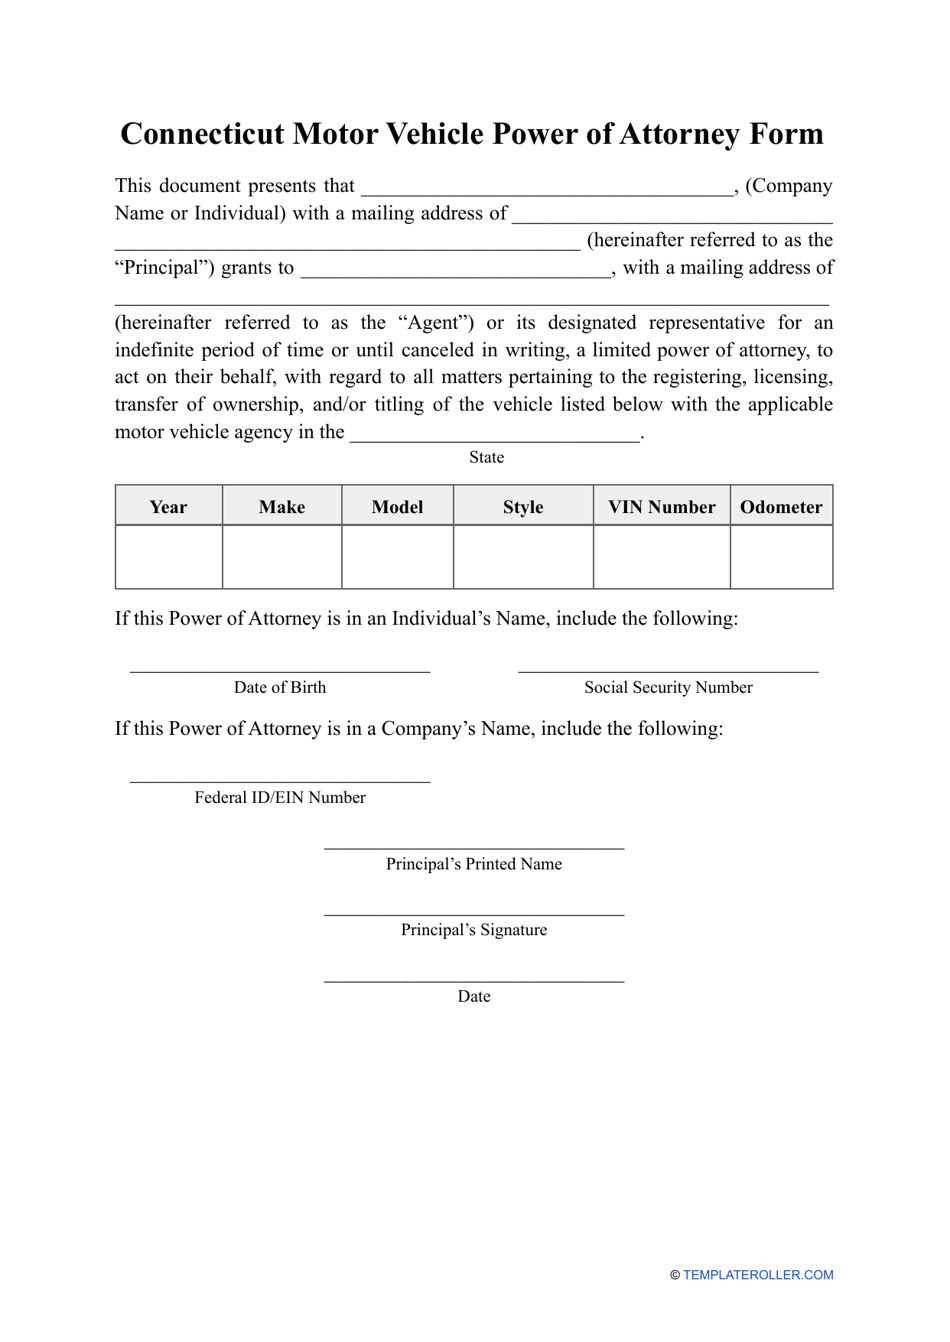 Motor Vehicle Power of Attorney Form - Connecticut, Page 1